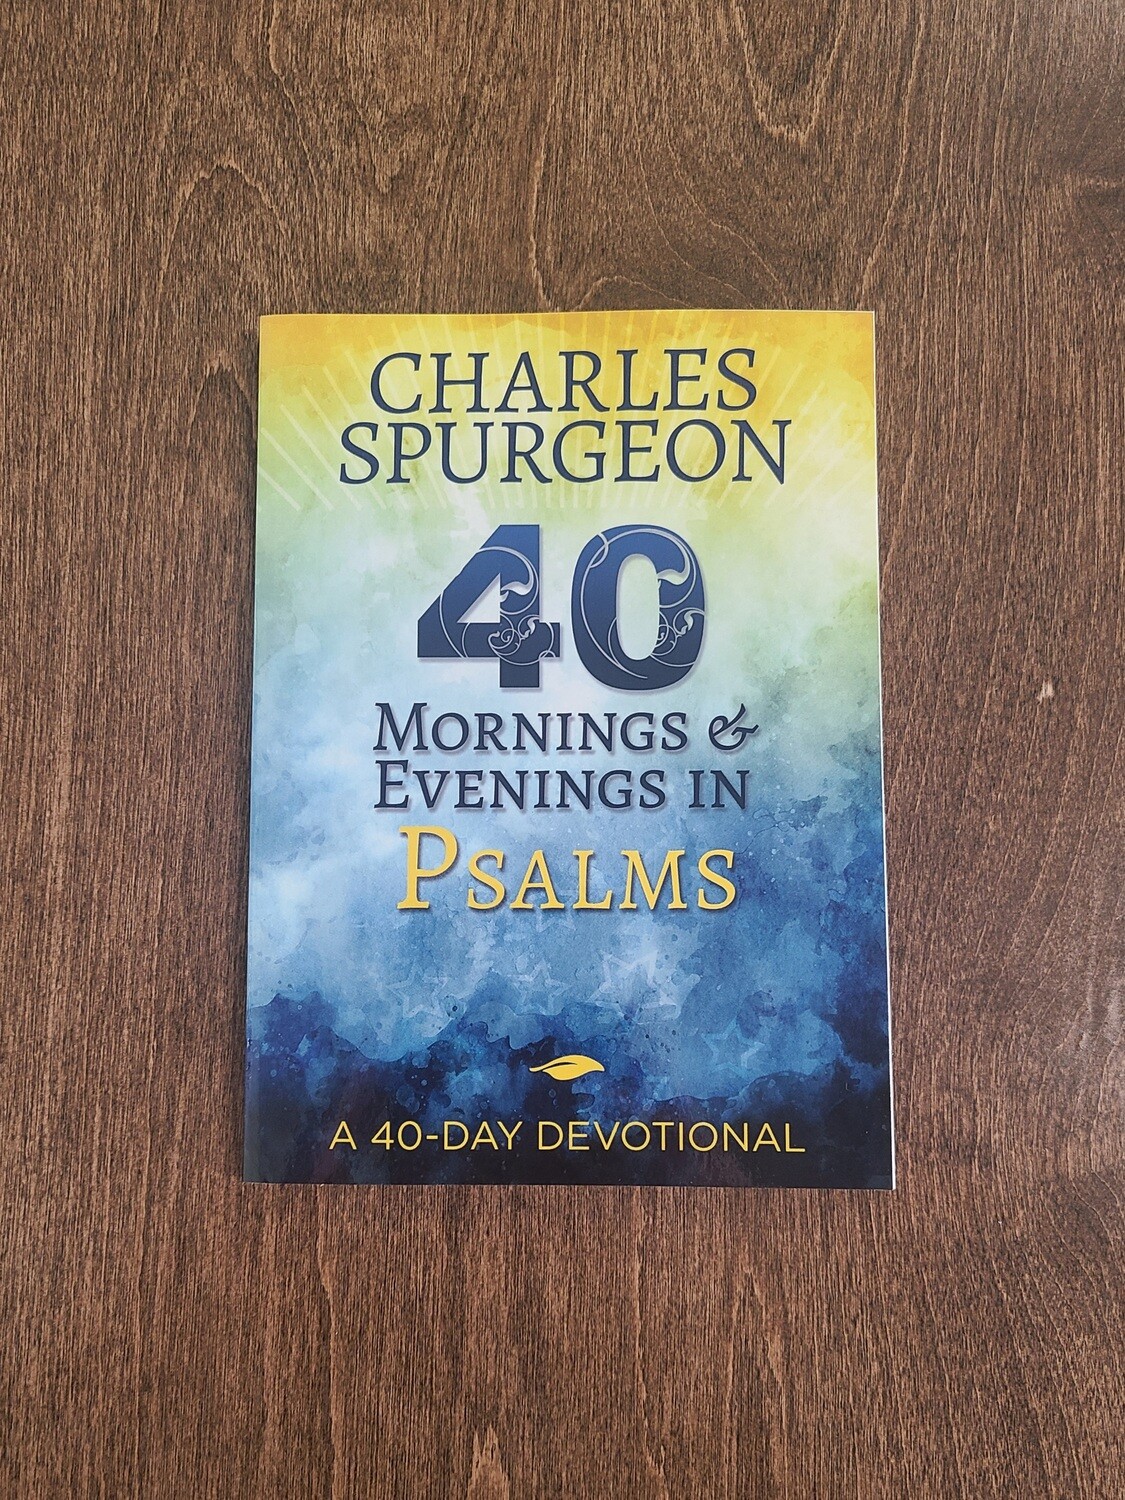 40 Mornings and Evenings in Psalms: A 40-Day Devotional by Charles Spurgeon